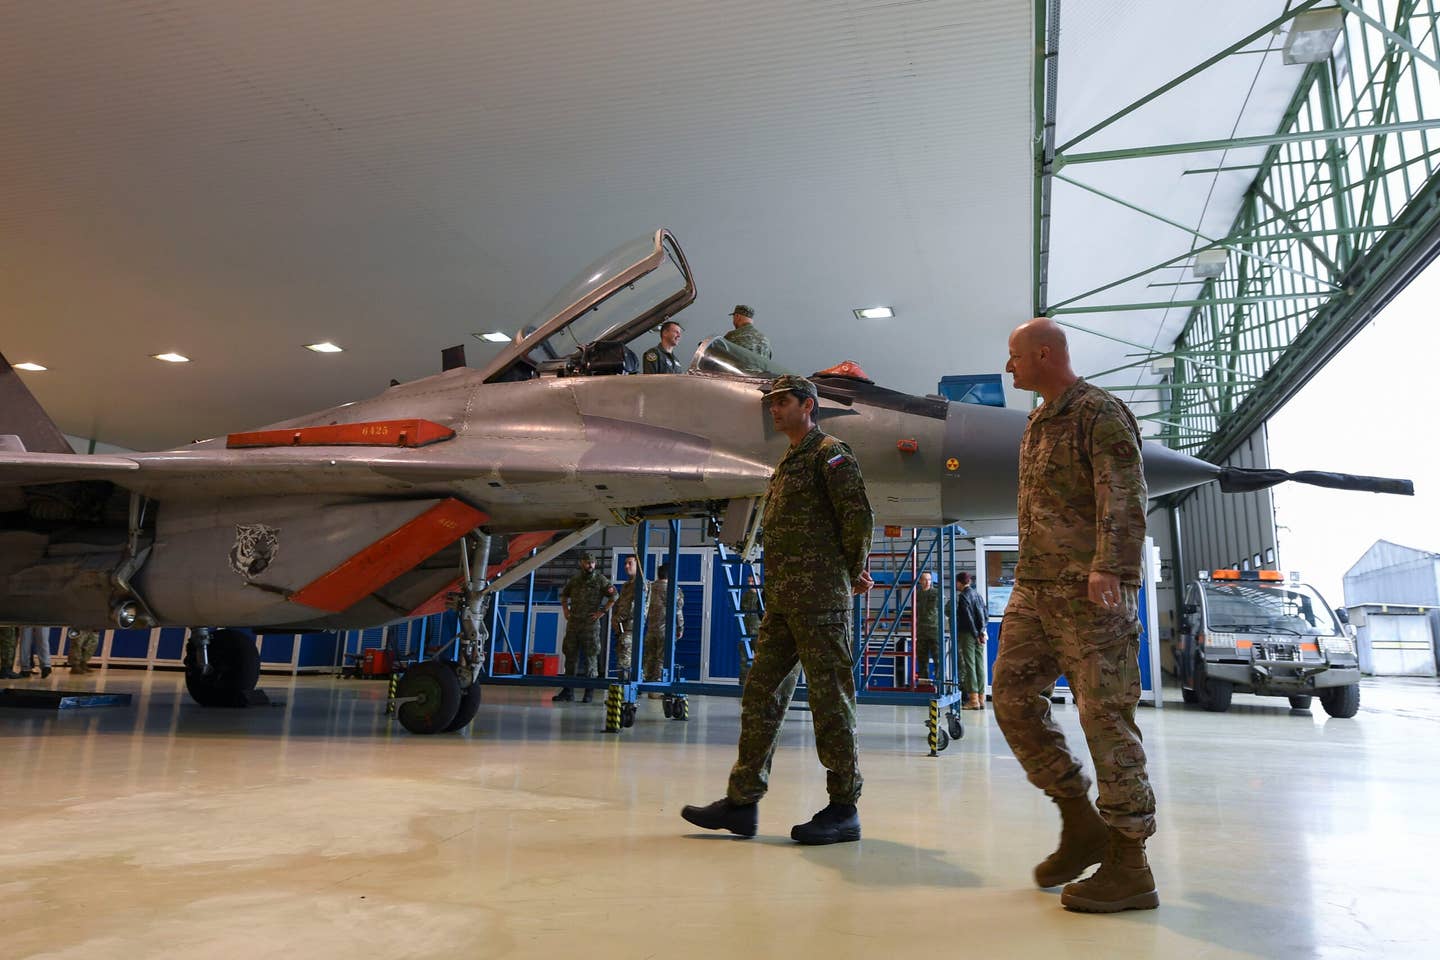 Slovak Air Force Maj. Peter Krajňák, left, Tactical Wing Sliac chief of air engineer services, and U.S. Air Force Brig. Gen. Christopher J. Ireland, U.S. Air Forces in Europe and Air Forces Africa chief of staff, walk around a Slovak MiG-29 during a tour at Sliač Air Base, Slovakia, in 2020. <em>U.S. Air Force photo by Staff Sgt. Savannah L. Waters</em><br>